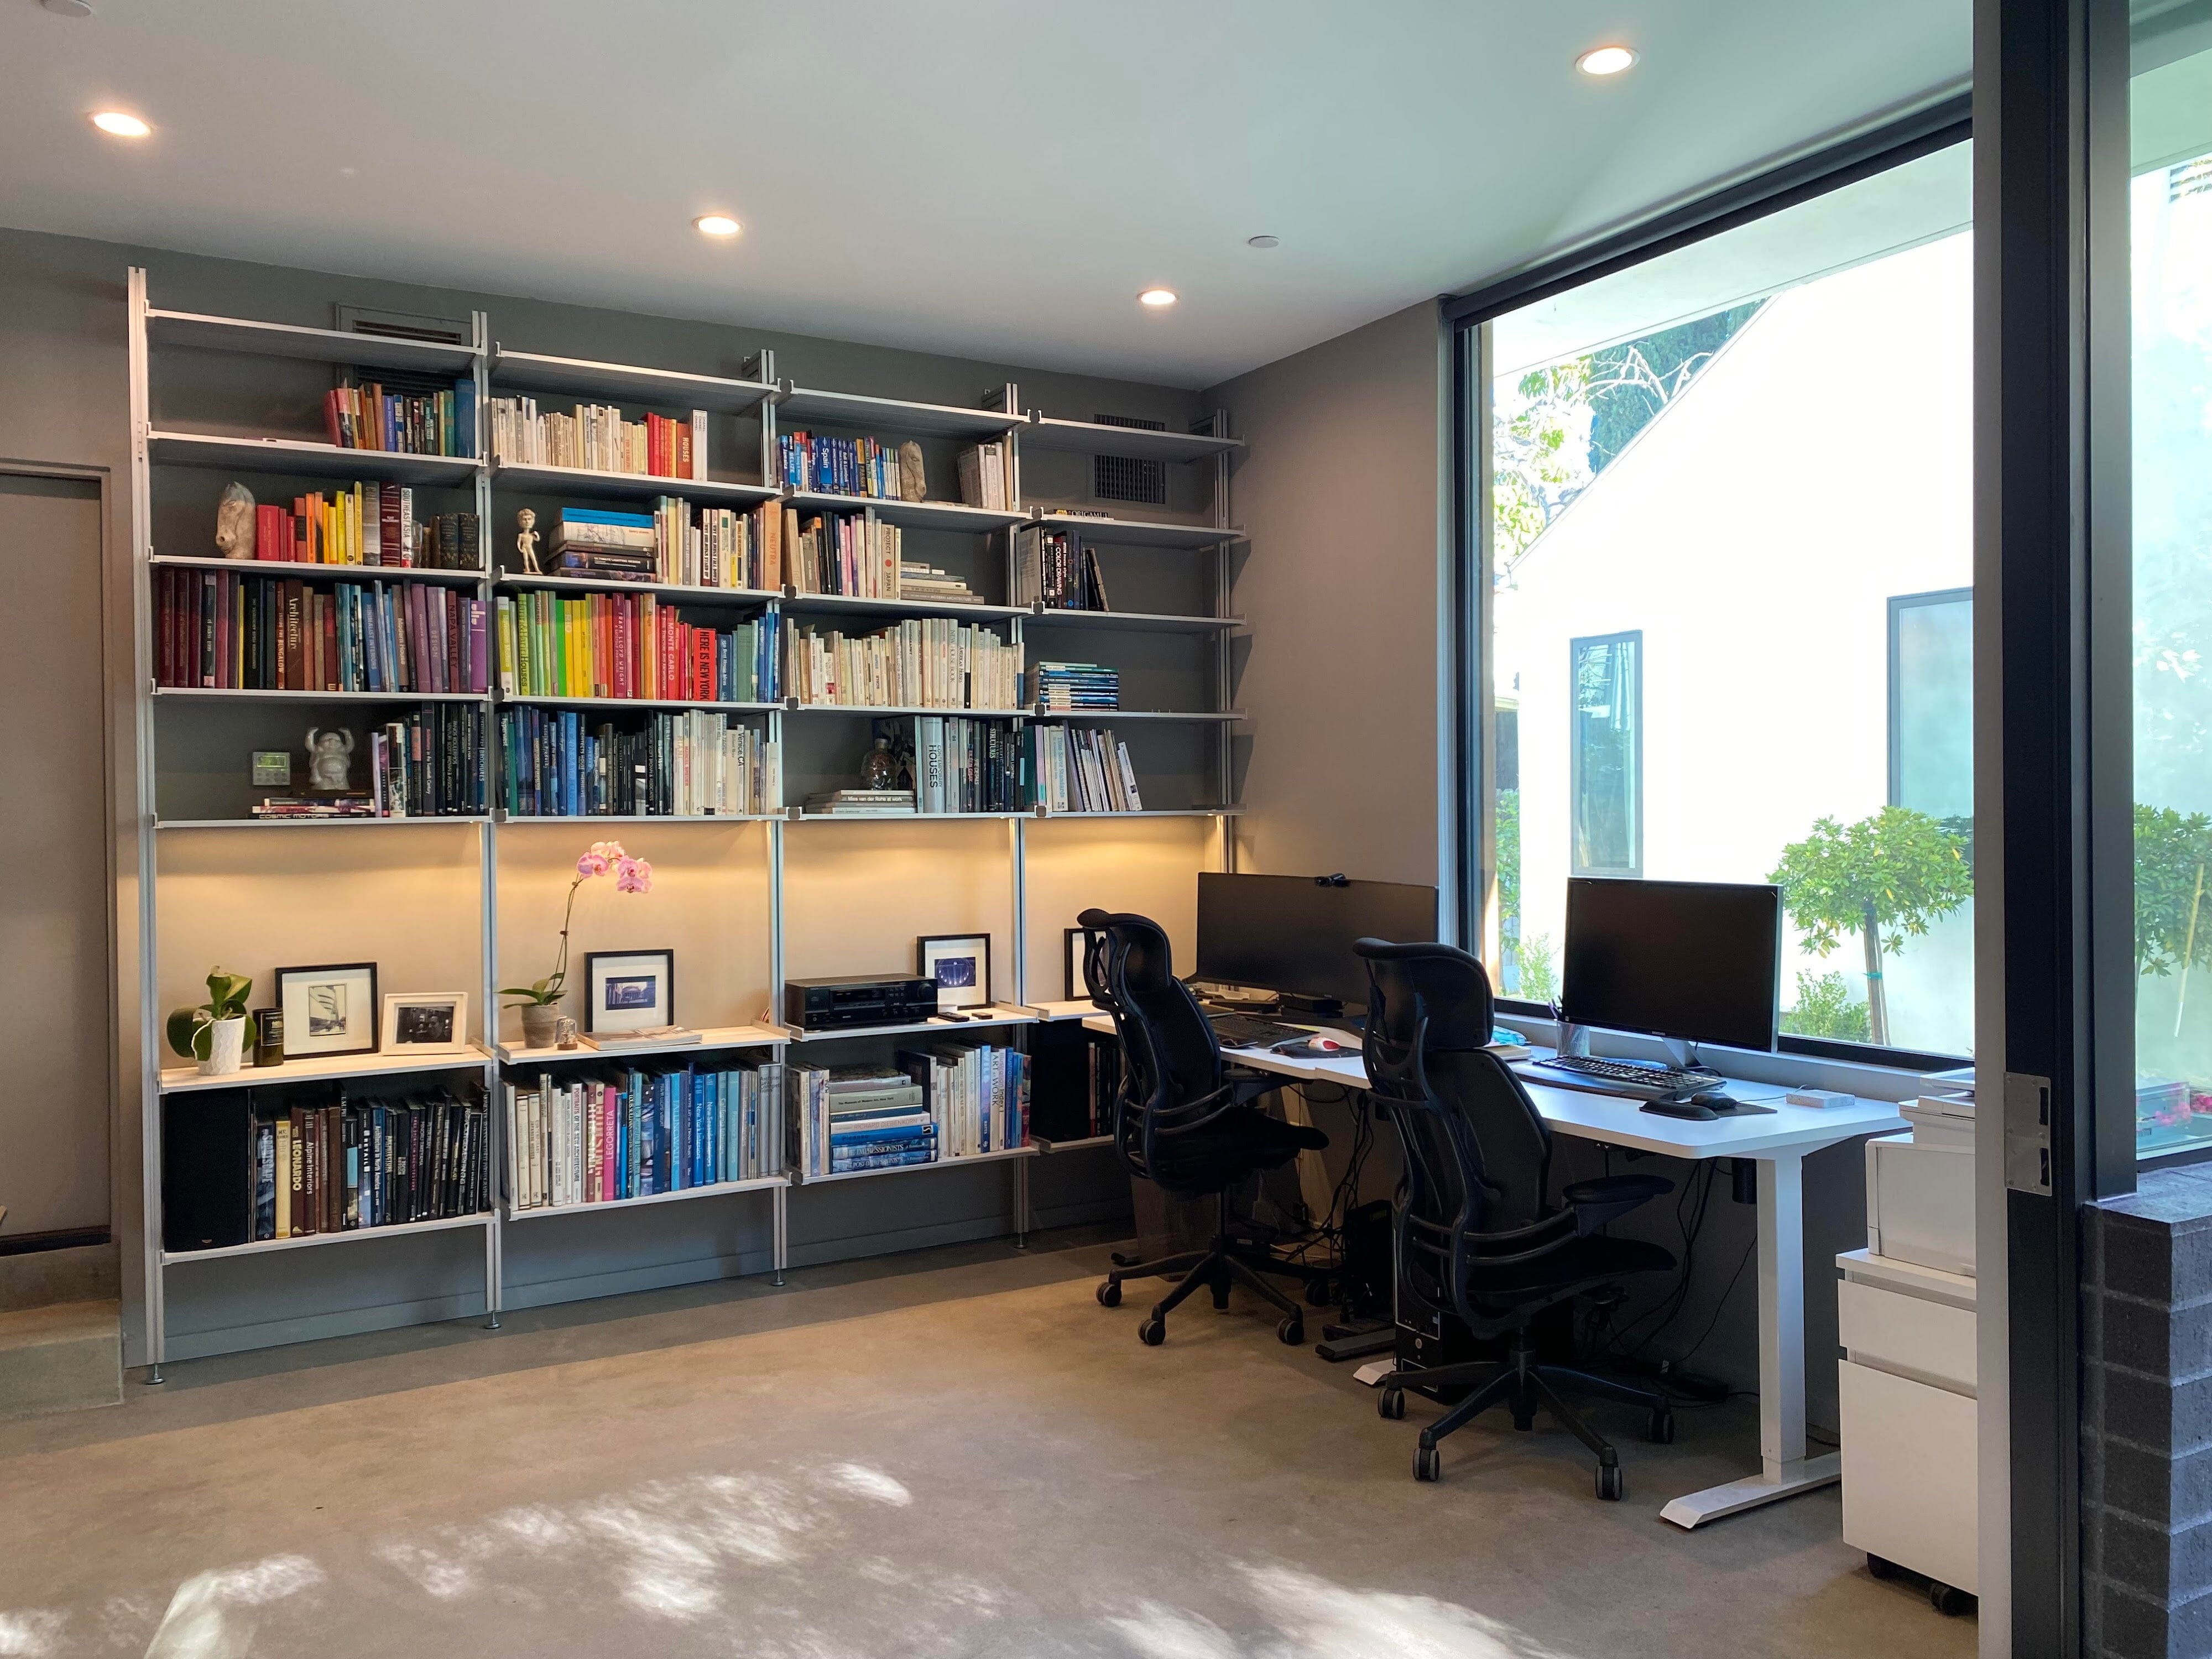 LA Architecture Firm Uses Shelves to Transform Office Space